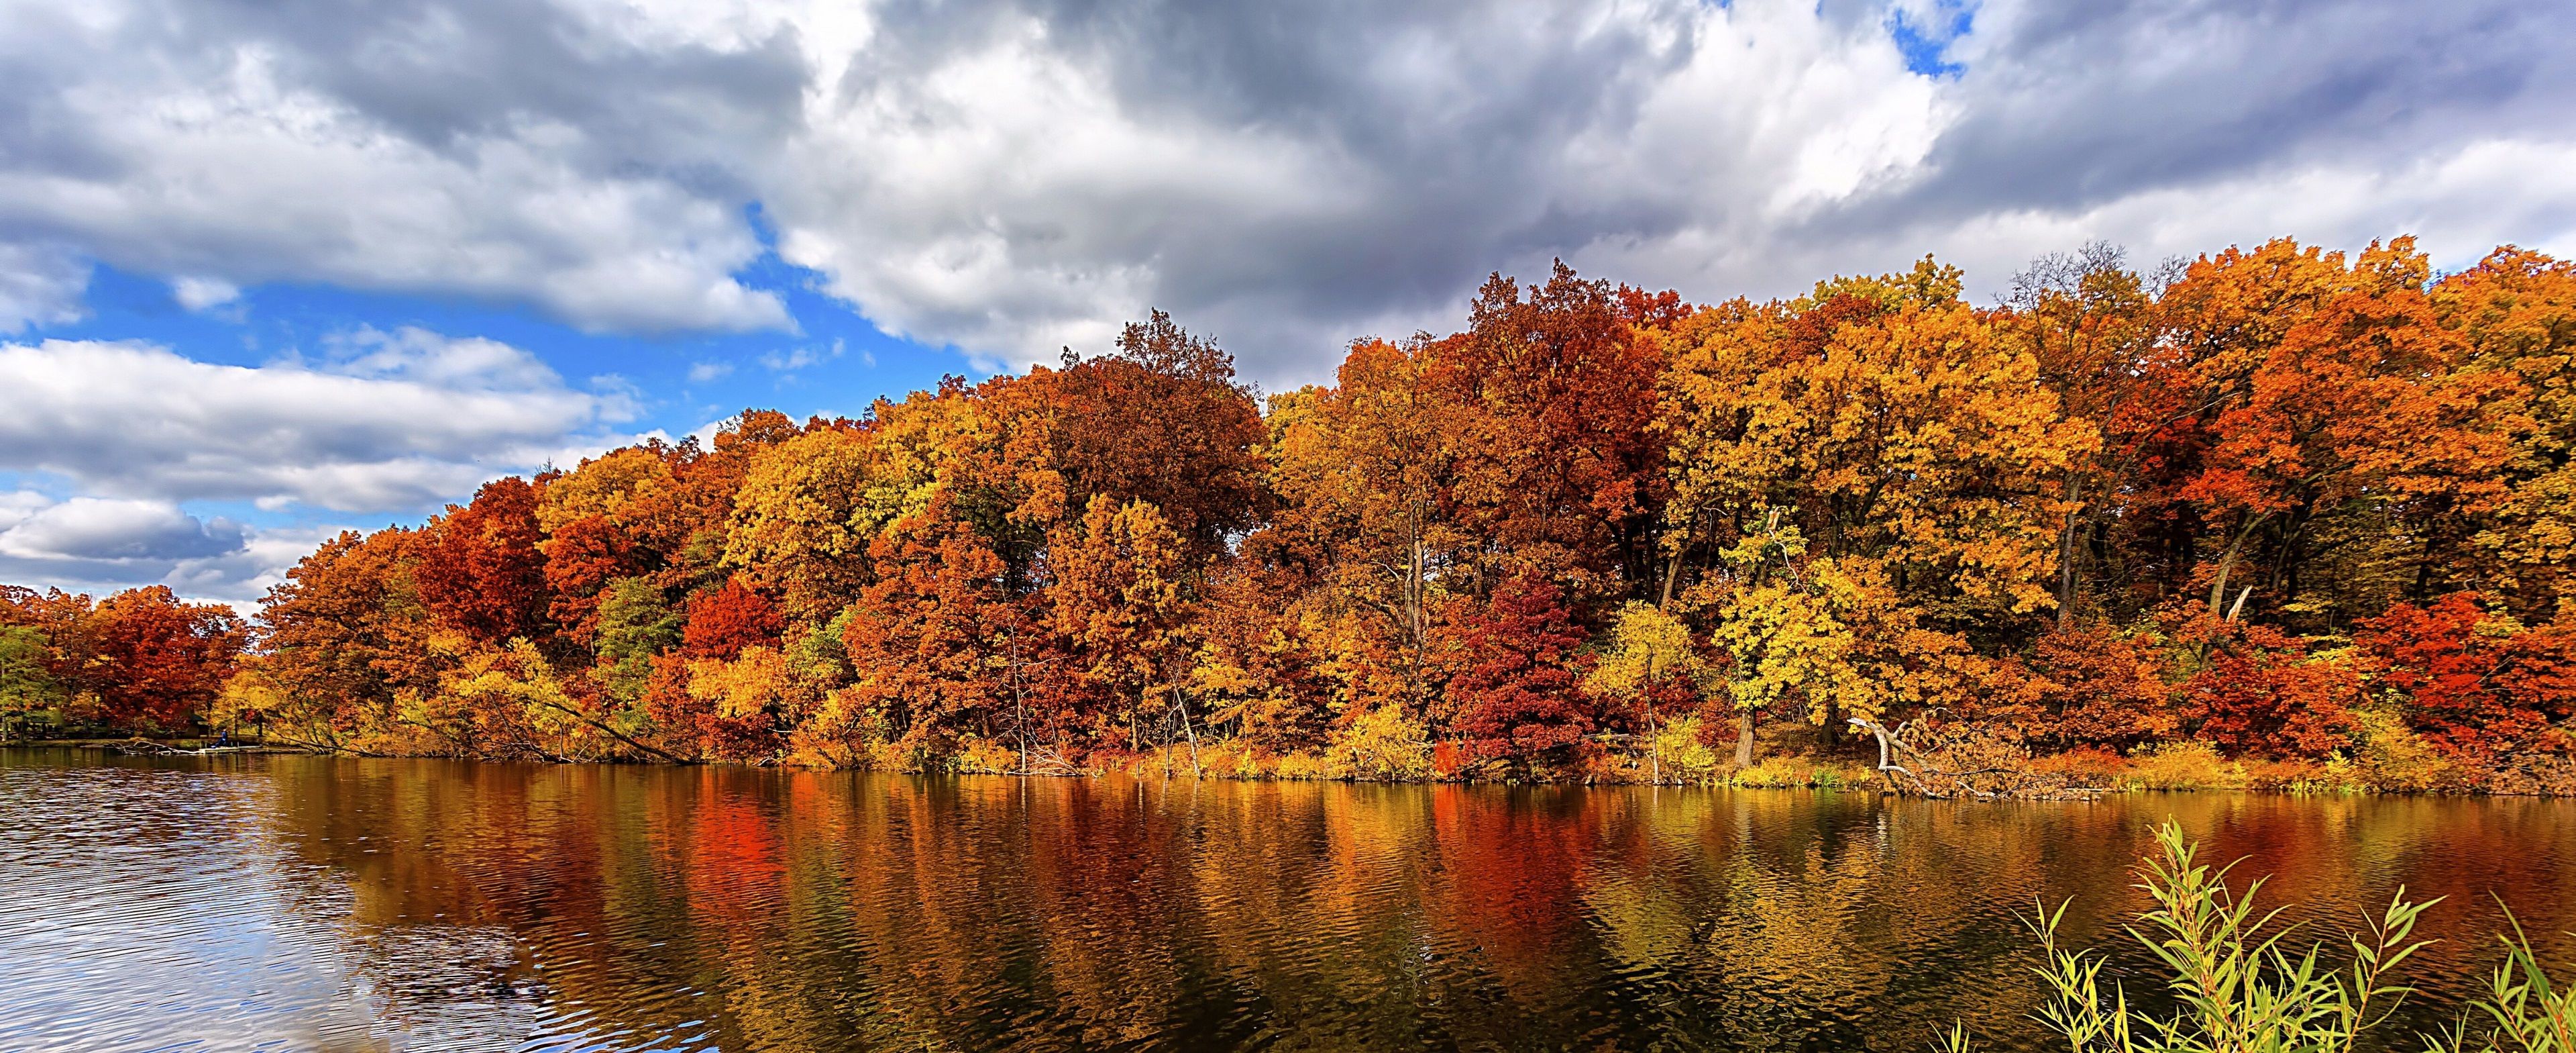 autumn 4k HD wallpaper download. Autumn forest, Forest lake, Northern indiana